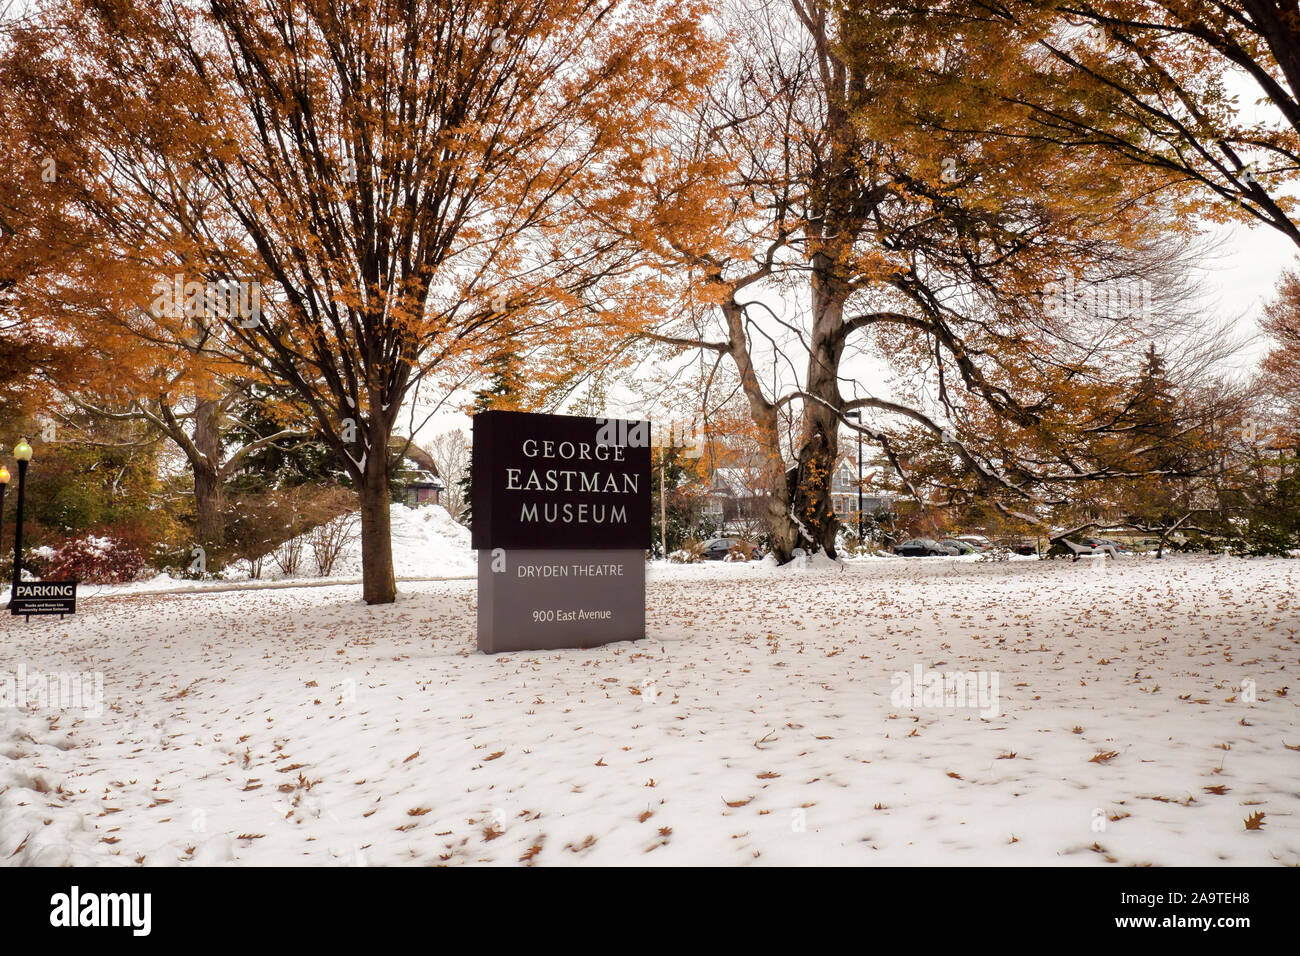 Rochester, New York, USA. November 15, 2019. Welcoming sign to the George Eastman Museum and Dryden Theater on East Avenue in Rochester, New York Stock Photo